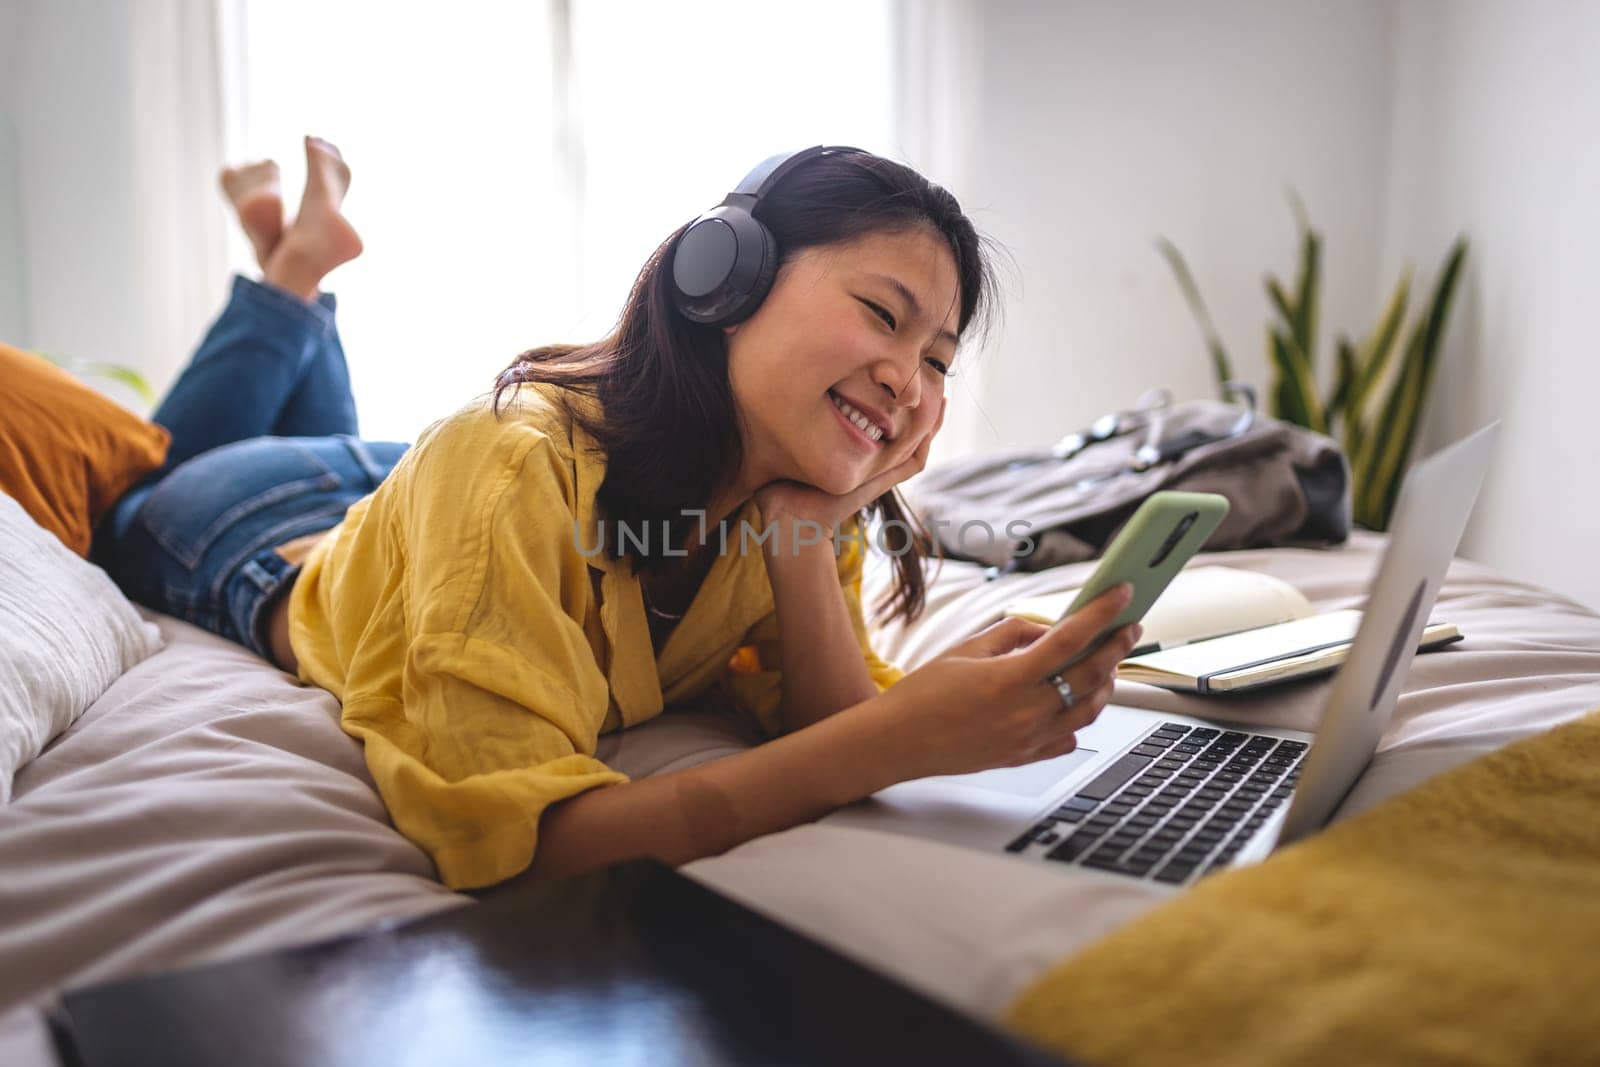 Female young chinese teen college student using phone and headphones listening to music lying down on bed. Asian young woman at home relaxing.